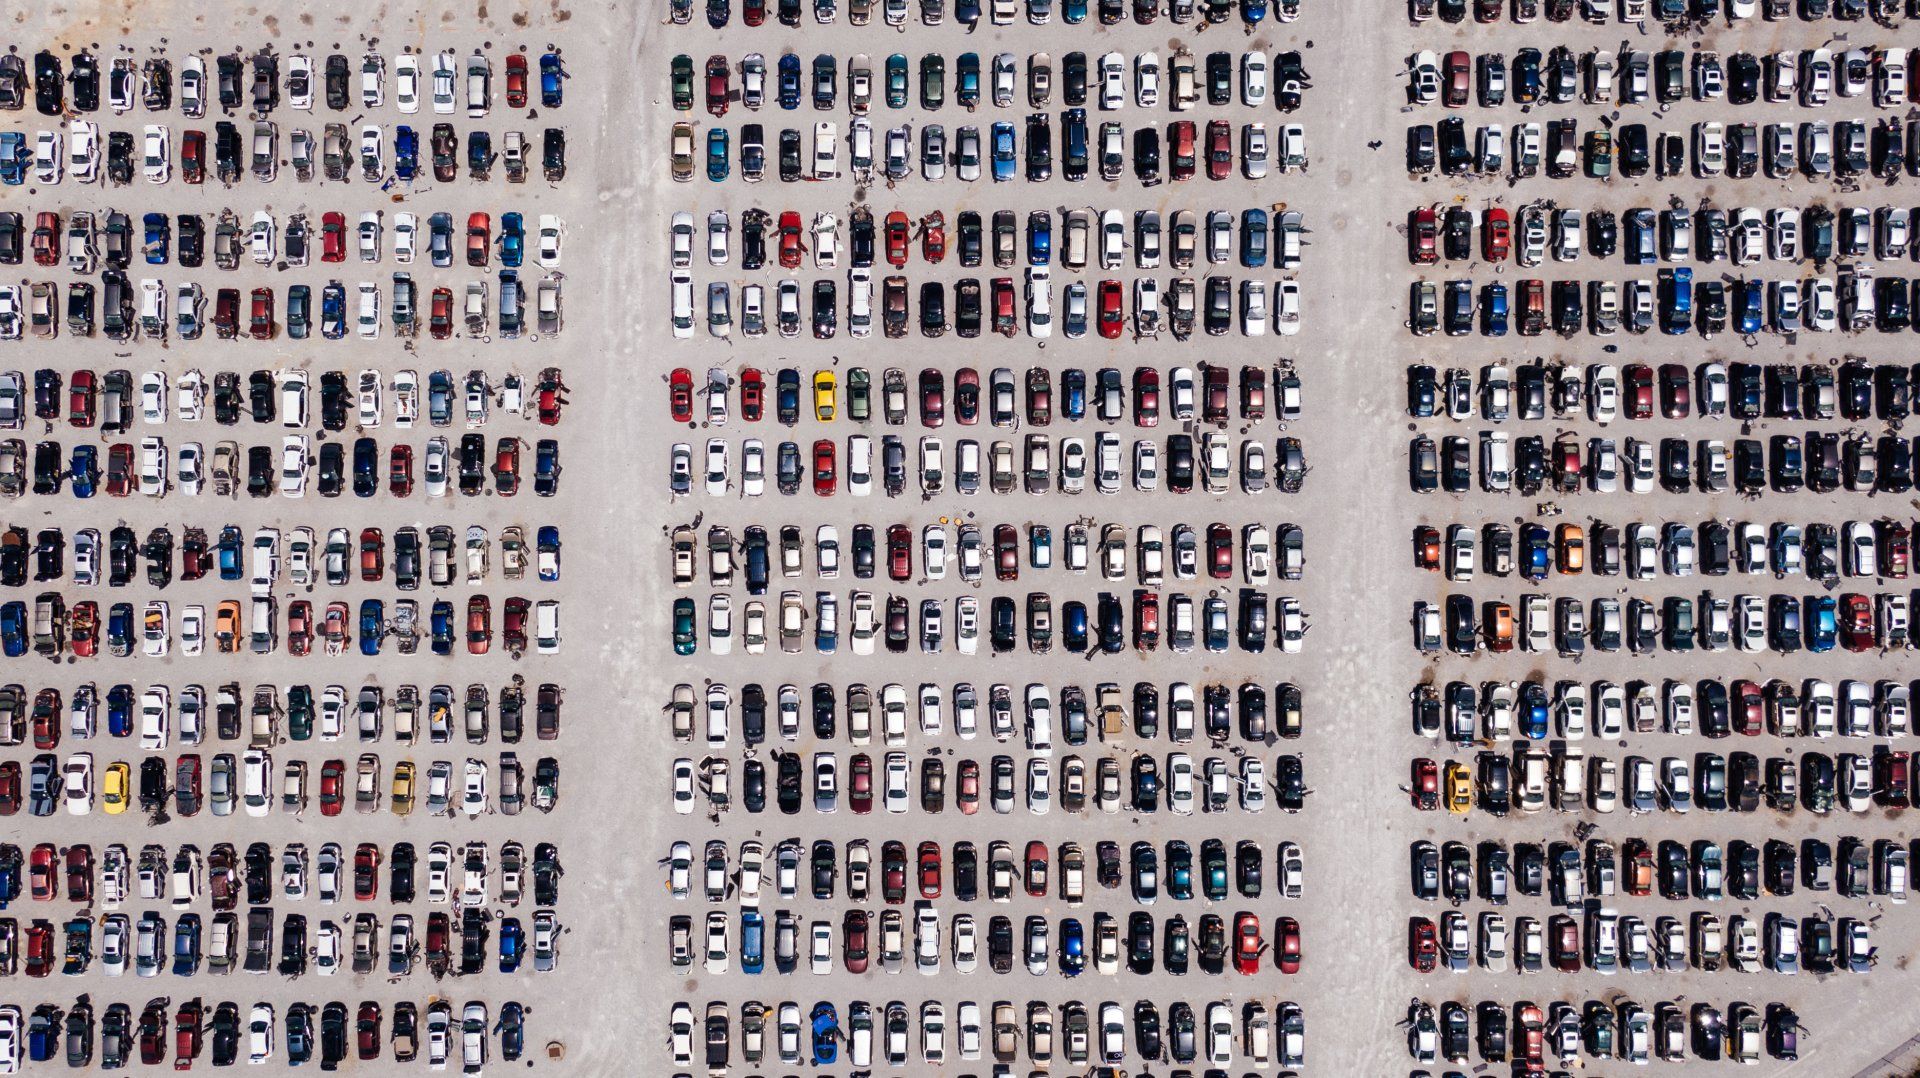 Comparing how 2019 and 2021 vehicle transactions differed using the DVLA anonymised car registrations dataset